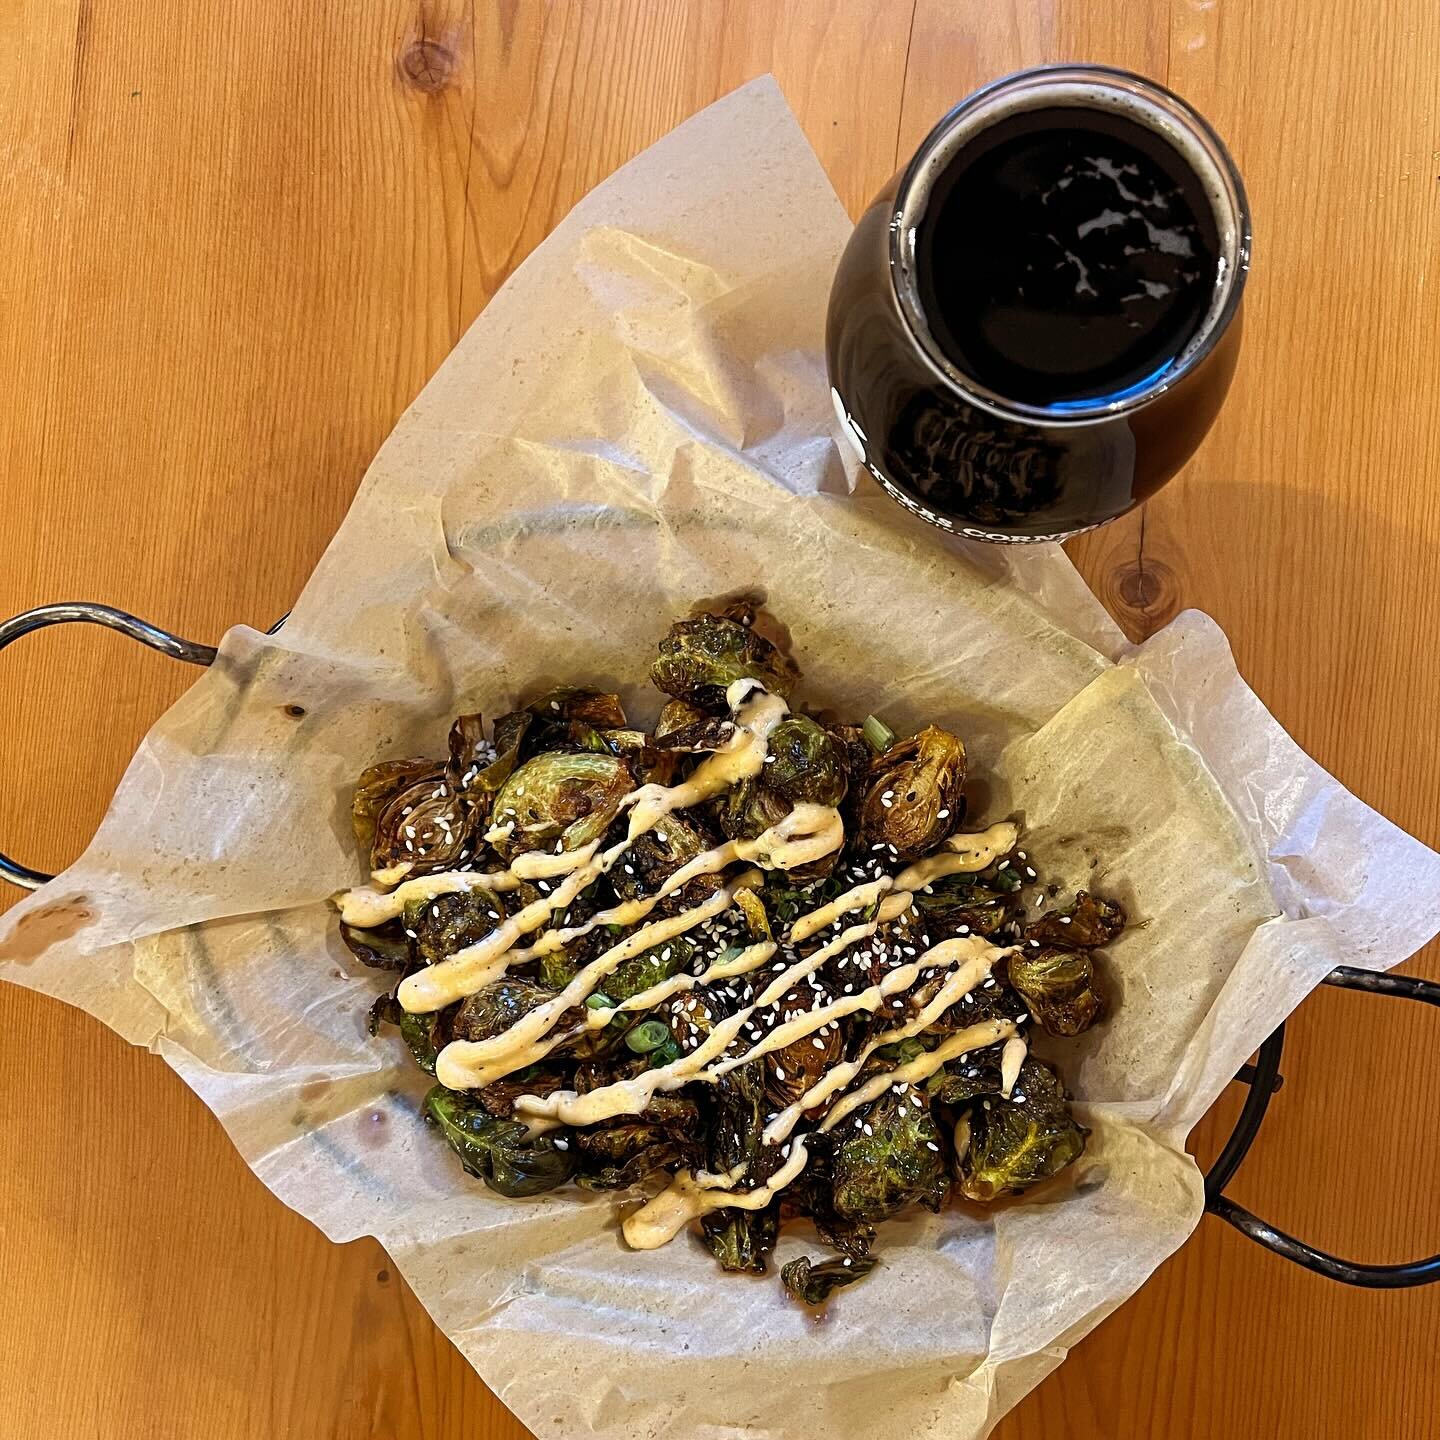 It&rsquo;s all thing Brussel sprouts this week! We&rsquo;ve sourced loads of fresh Brussels from @crispcountryacres for these weekly features. 

Asian Glazed Brussels - Fried and tossed in Korean BBQ sauce, Cajun aioli drizzle, green onion, sesame (v